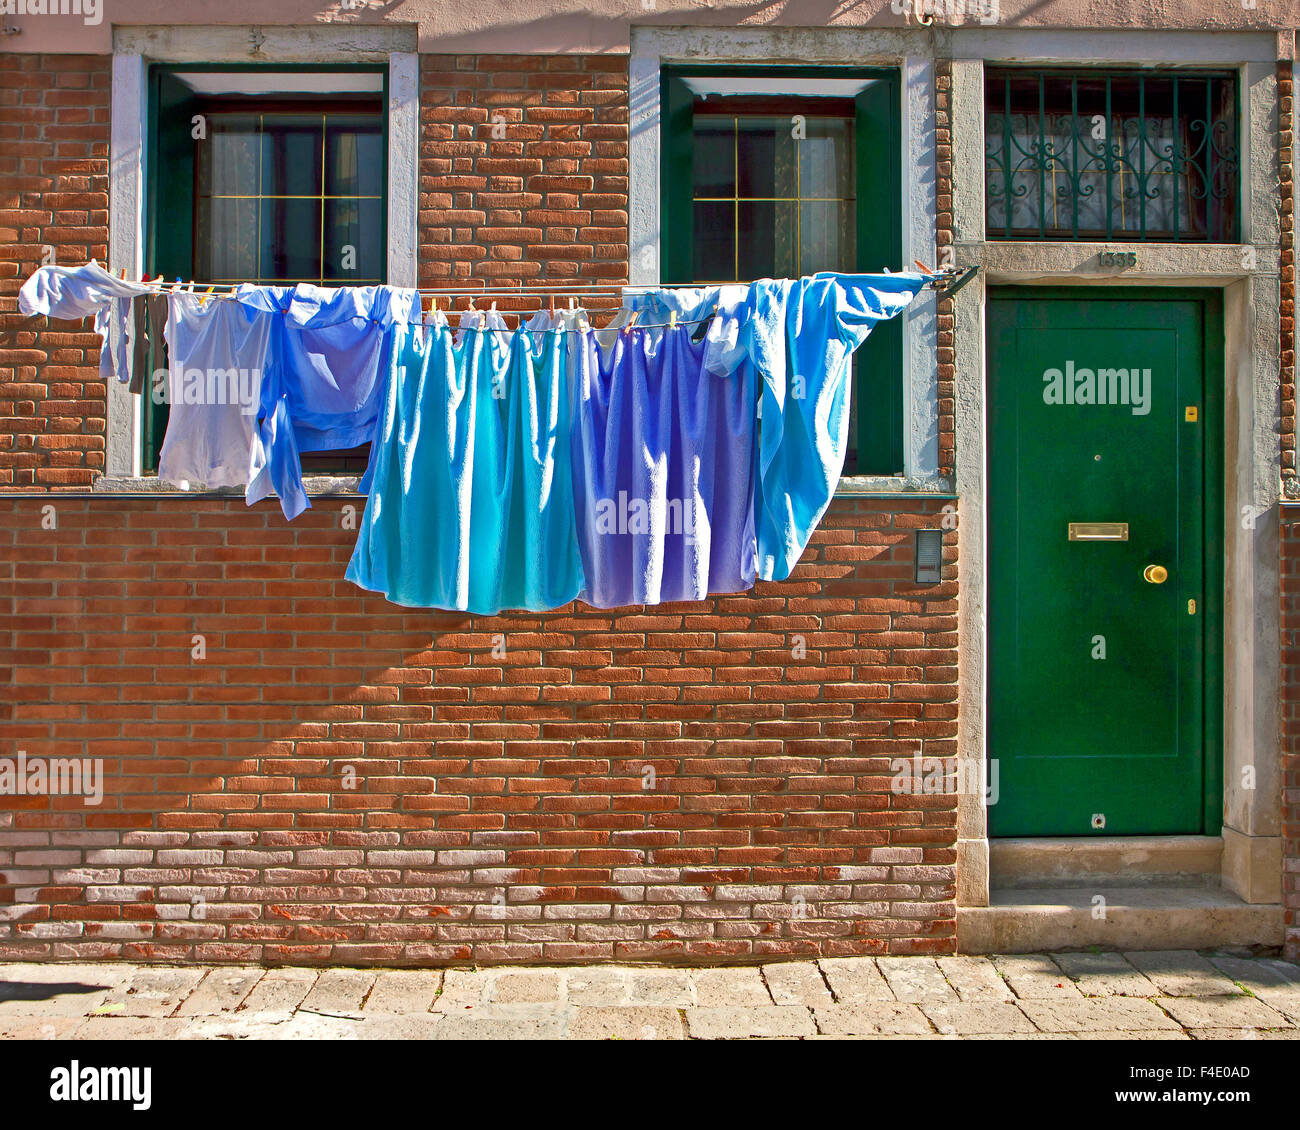 Venice, Italy - Laundry hanging on the clothesline in front of the windows near a green door entrance of a house Stock Photo